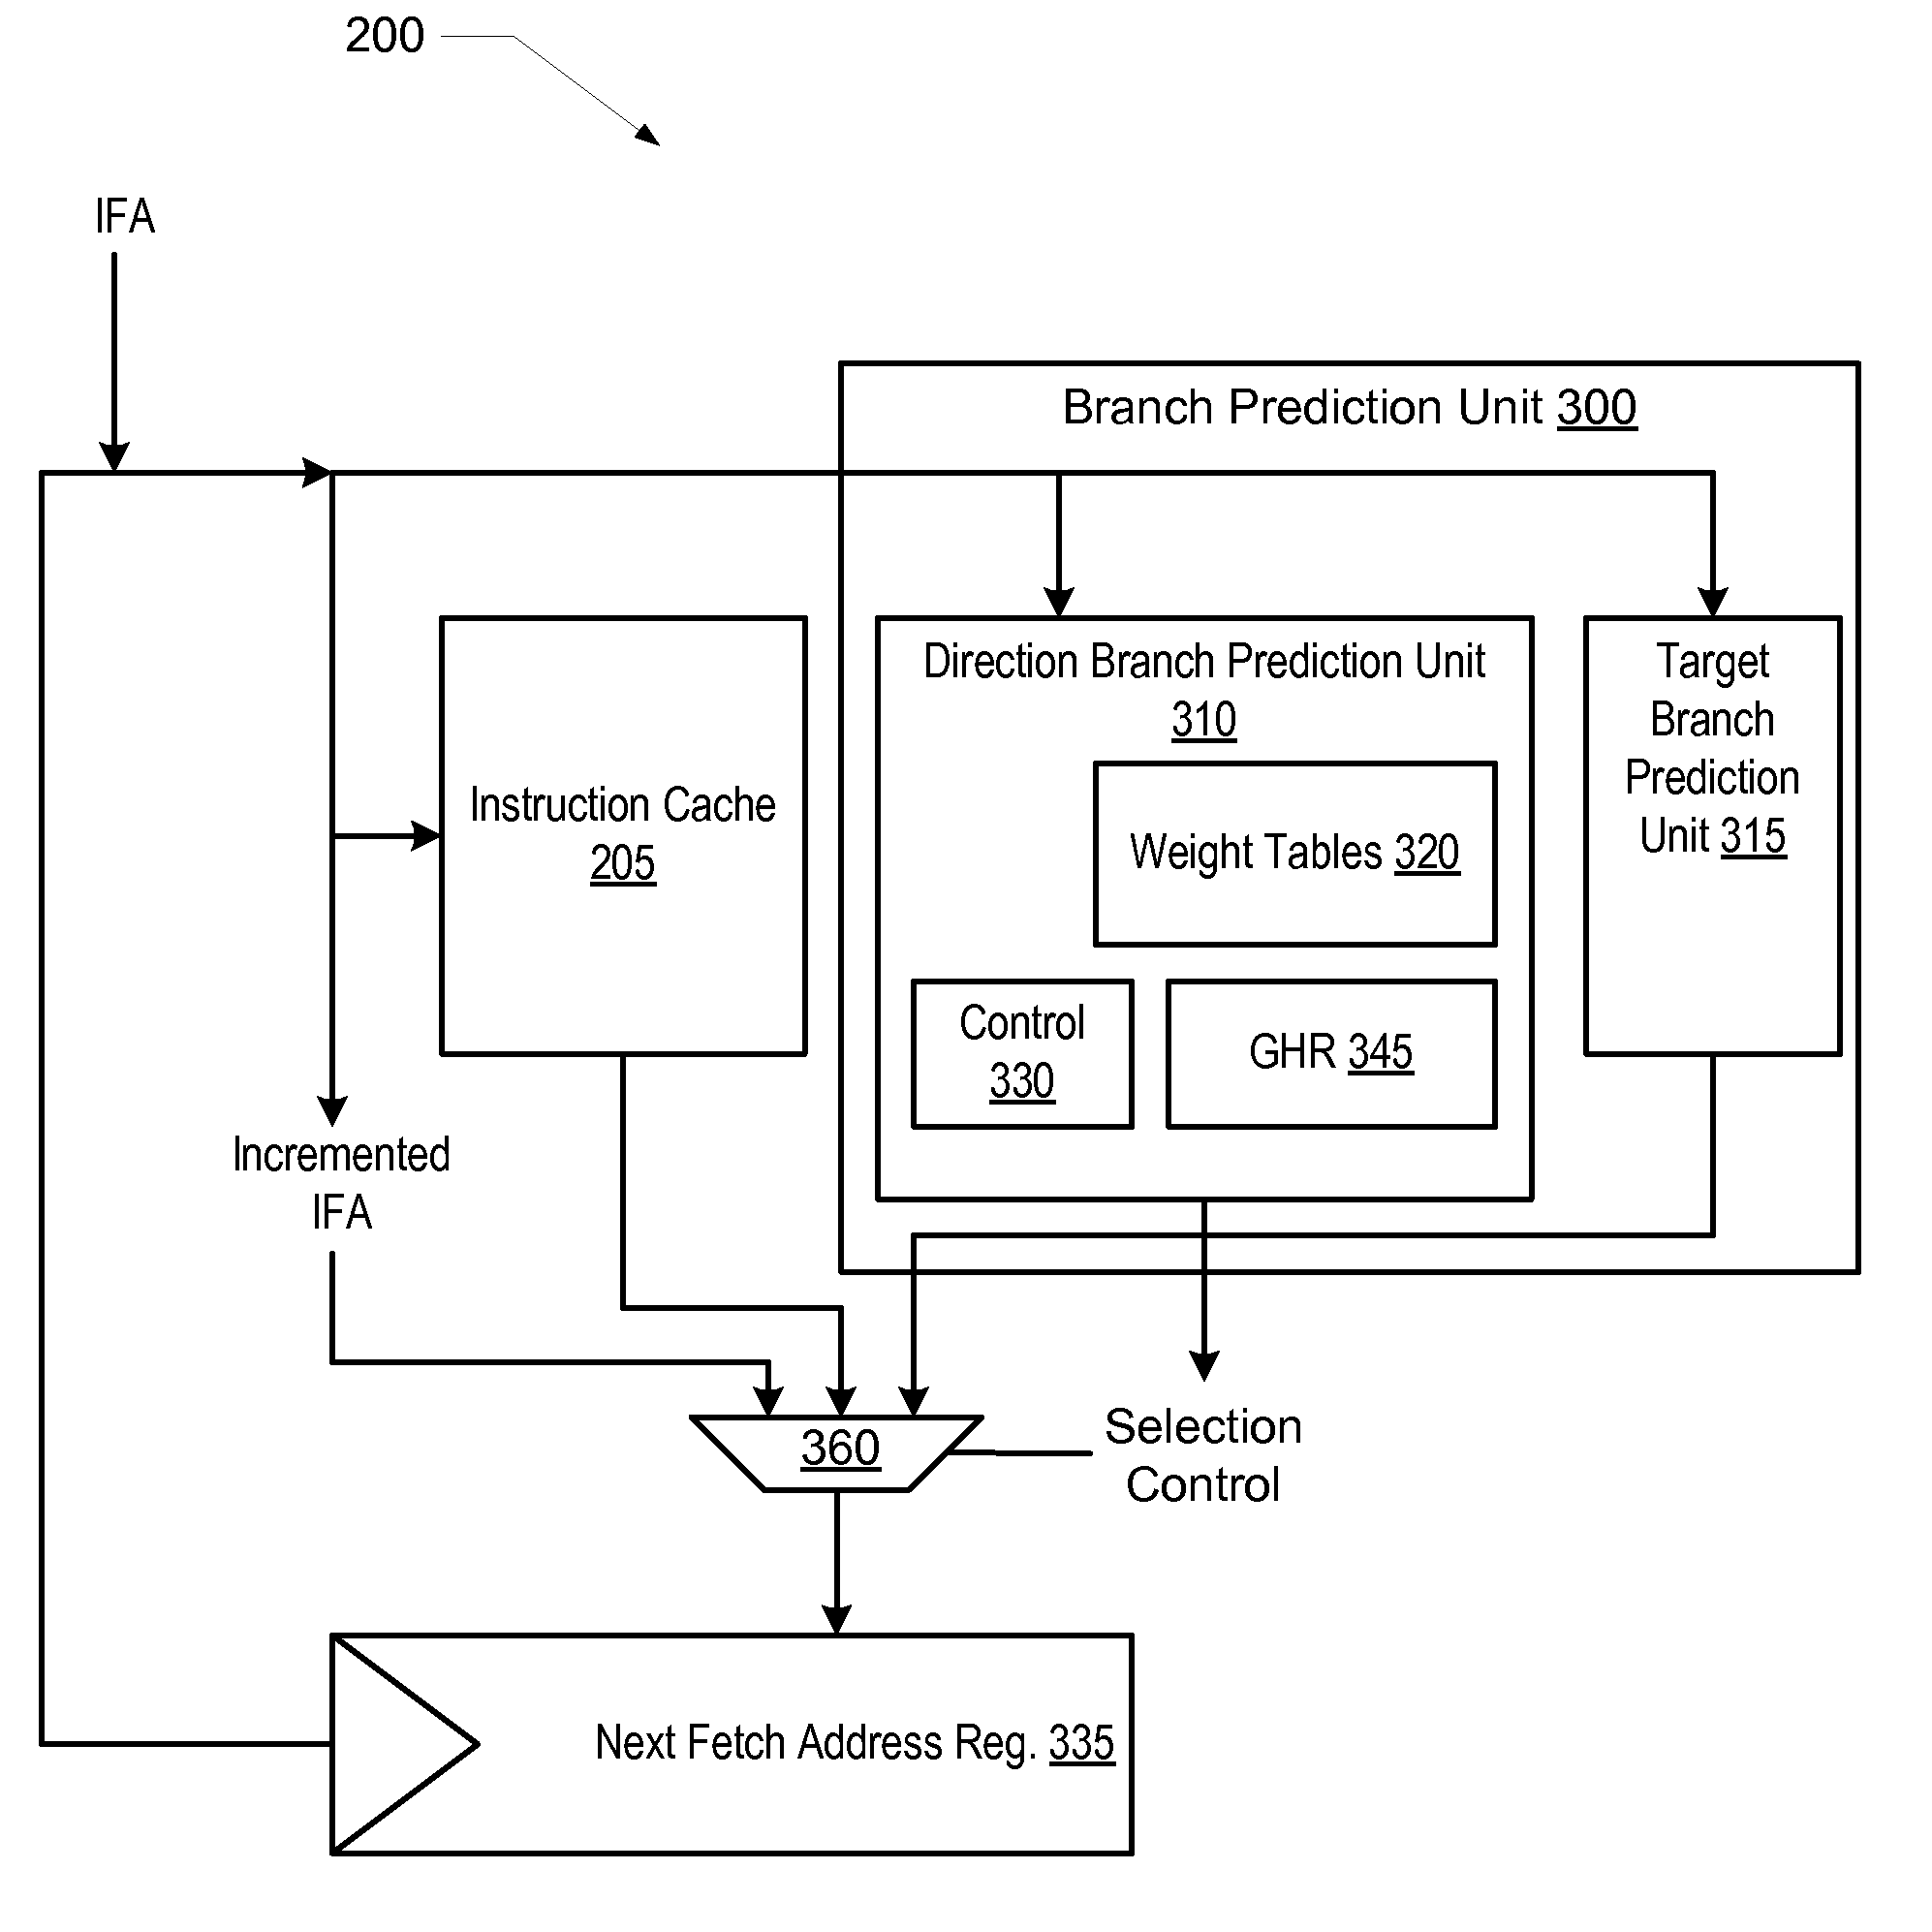 Perceptron-based branch prediction mechanism for predicting conditional branch instructions on a multithreaded processor